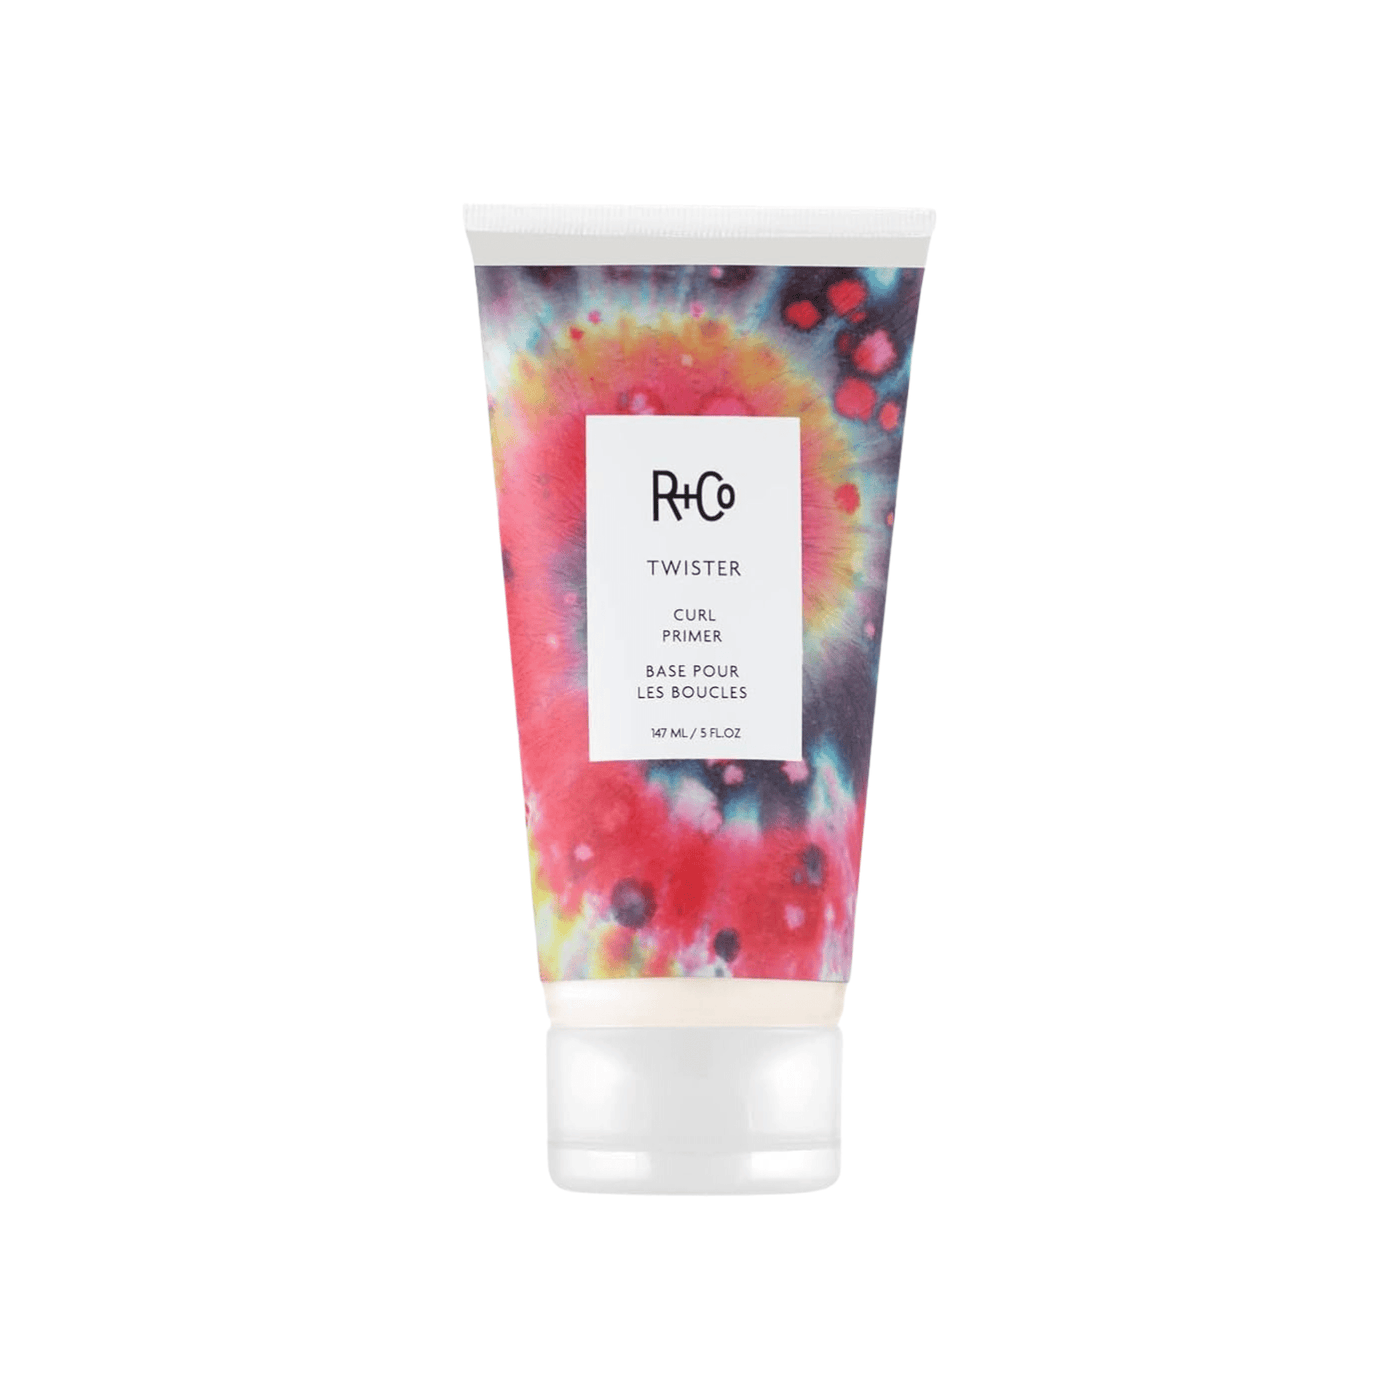 R+Co Styling R+Co TWISTER Curl Primer 147ml